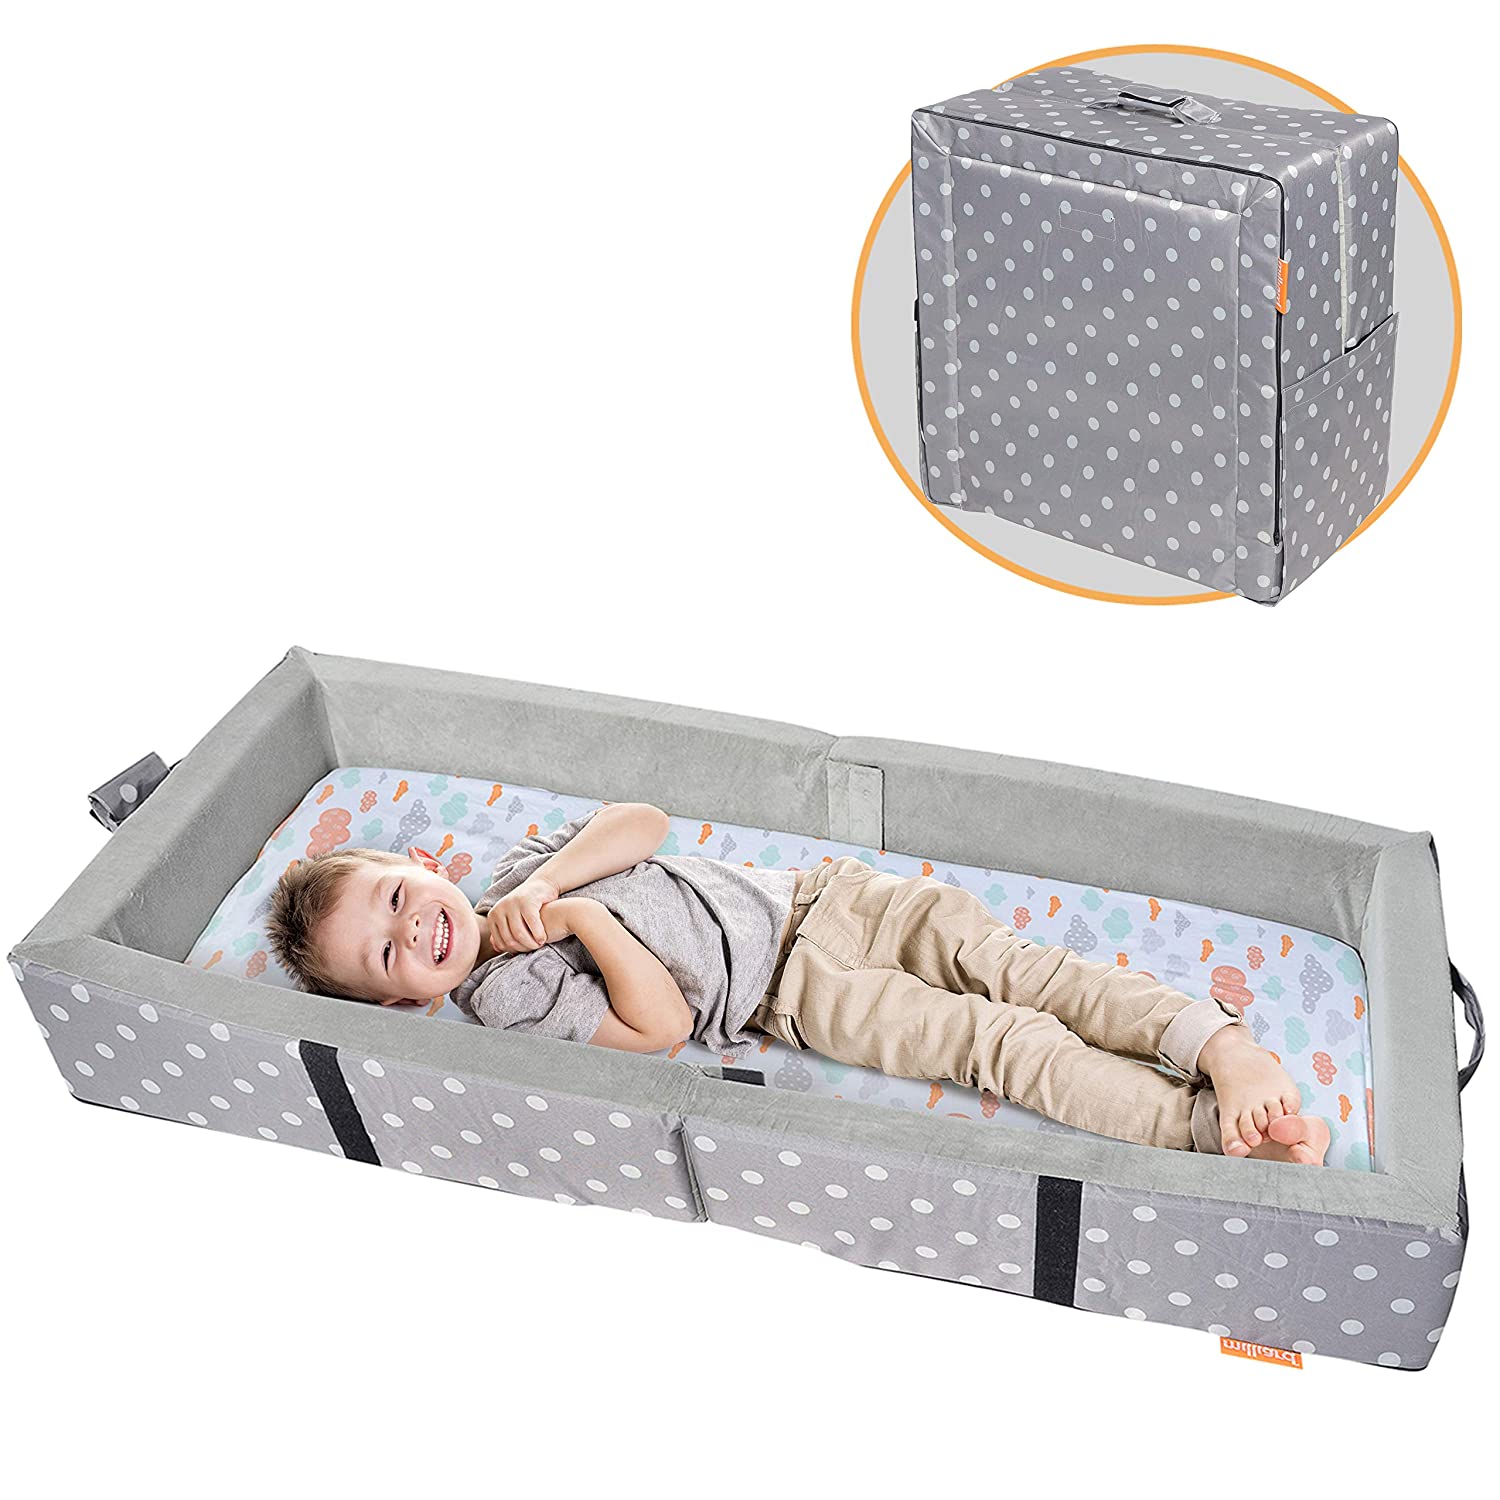 Milliard Portable Toddler Bumper Bed - Travel Bed for Toddler